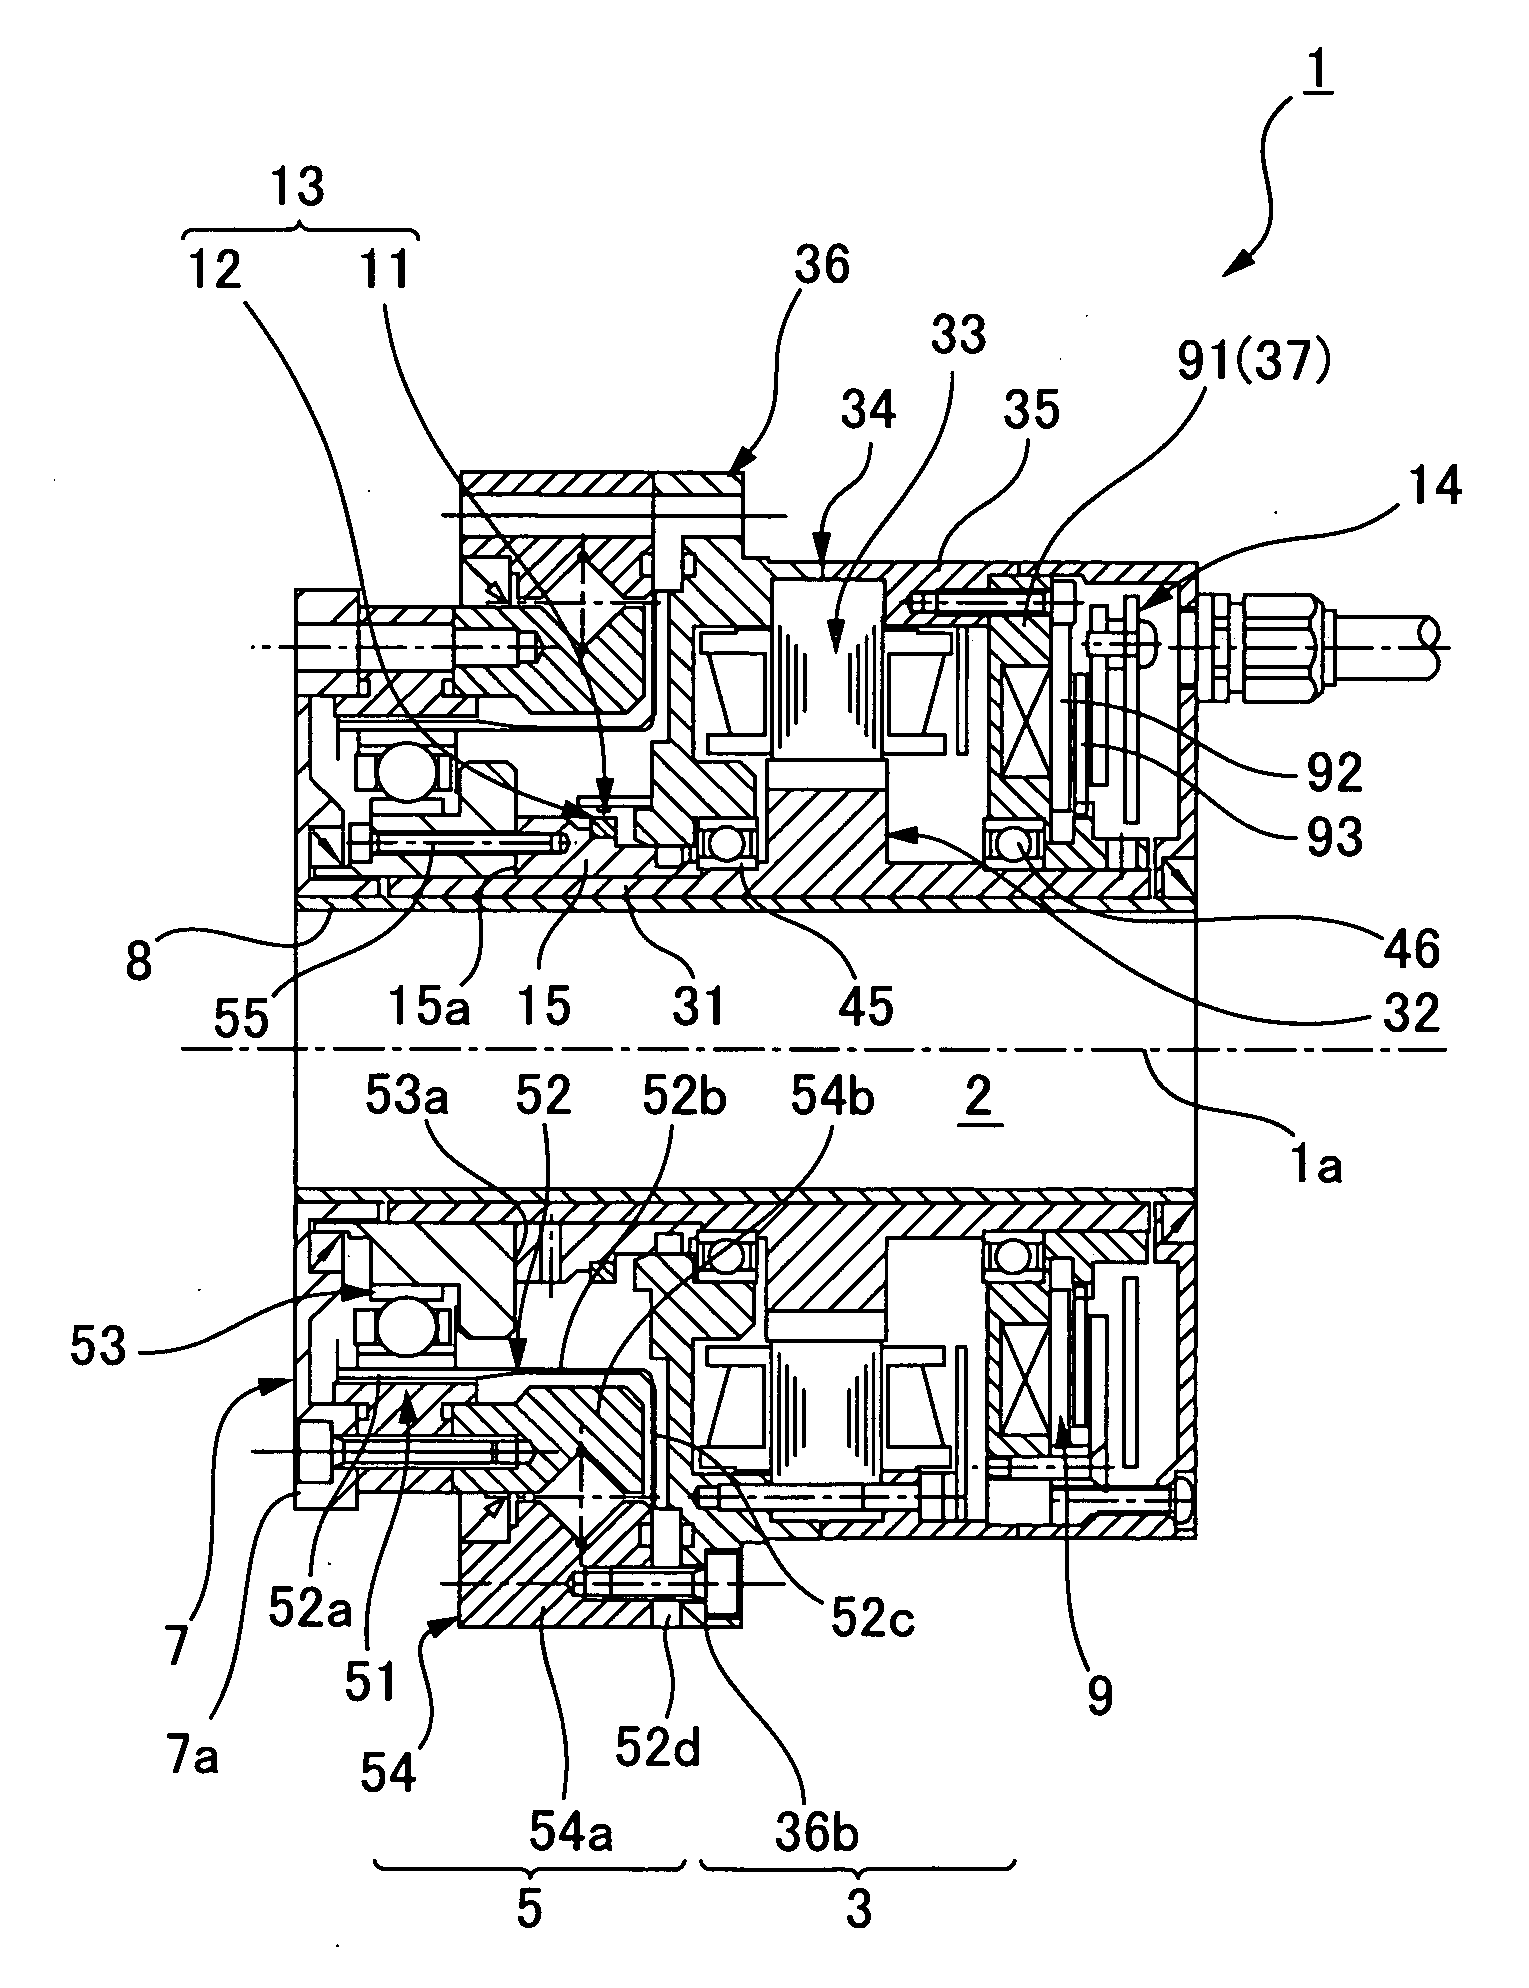 Actuator provided with wave reduction gear